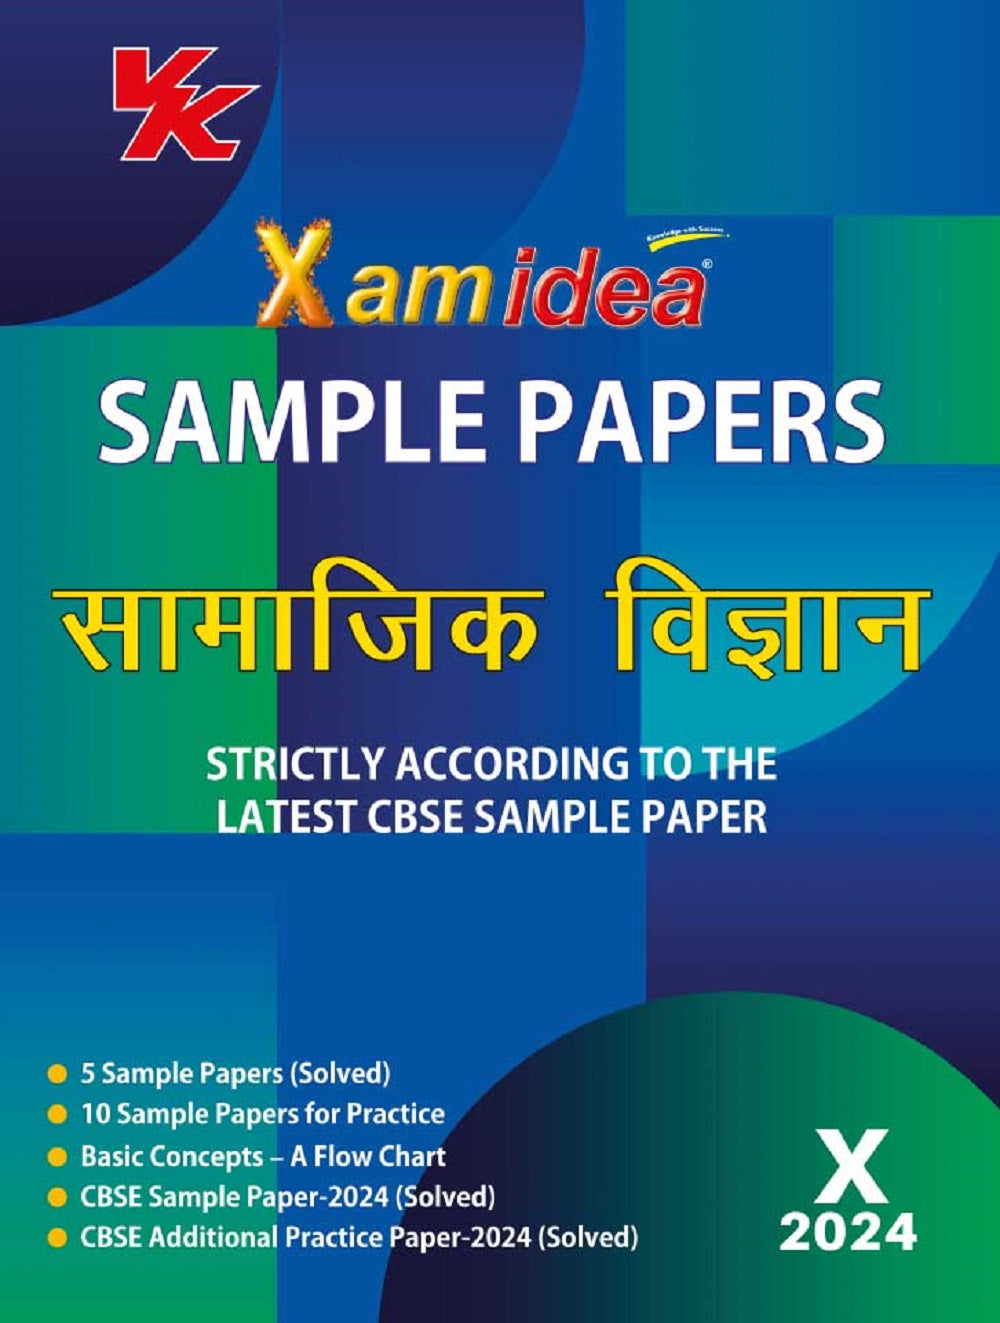 Xam idea Sample Papers Simplified Social Science (Hindi) | Class 10 for 2024 Board Exam | Latest Sample Papers 2024 (Additional Practice Paper-2024 based on CBSE Sample Paper released on 8th September)